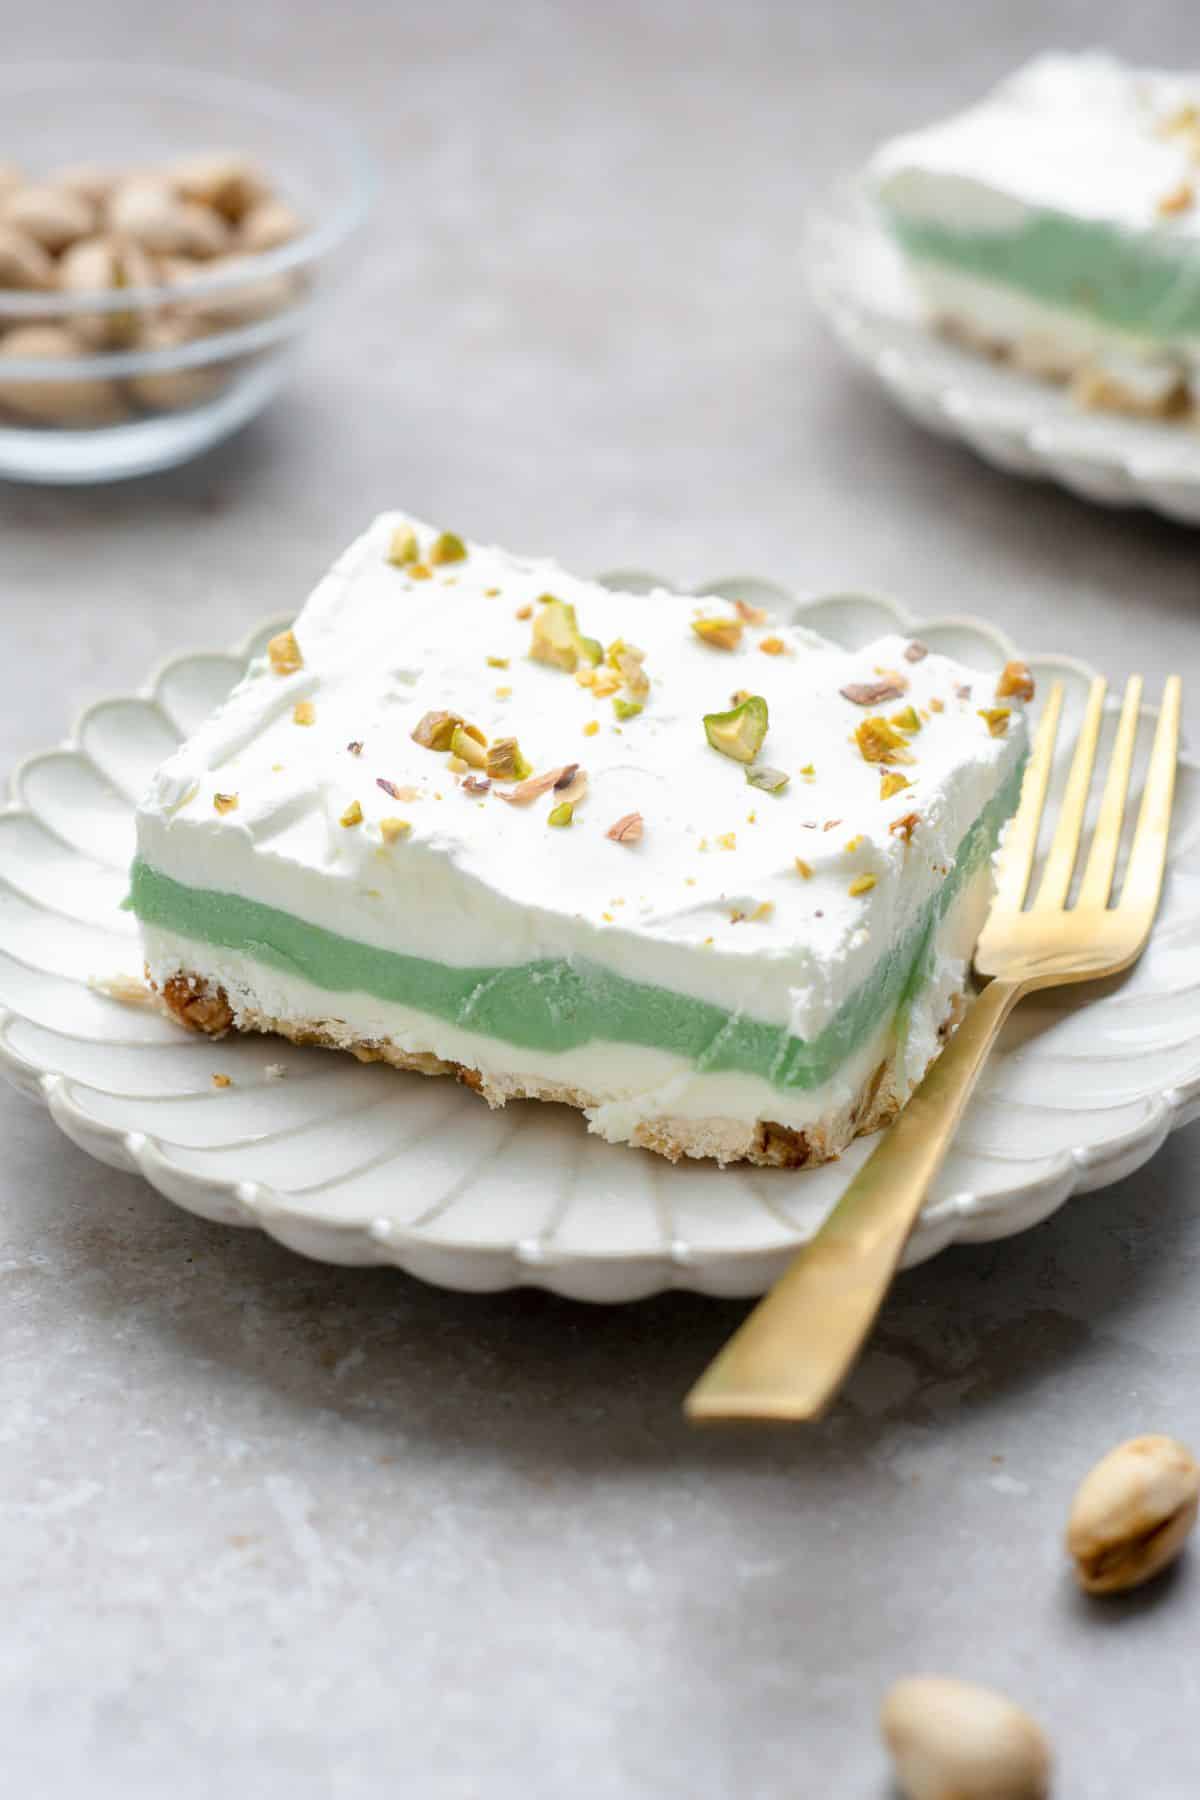 Pistachio dessert on a white plate with a fork.